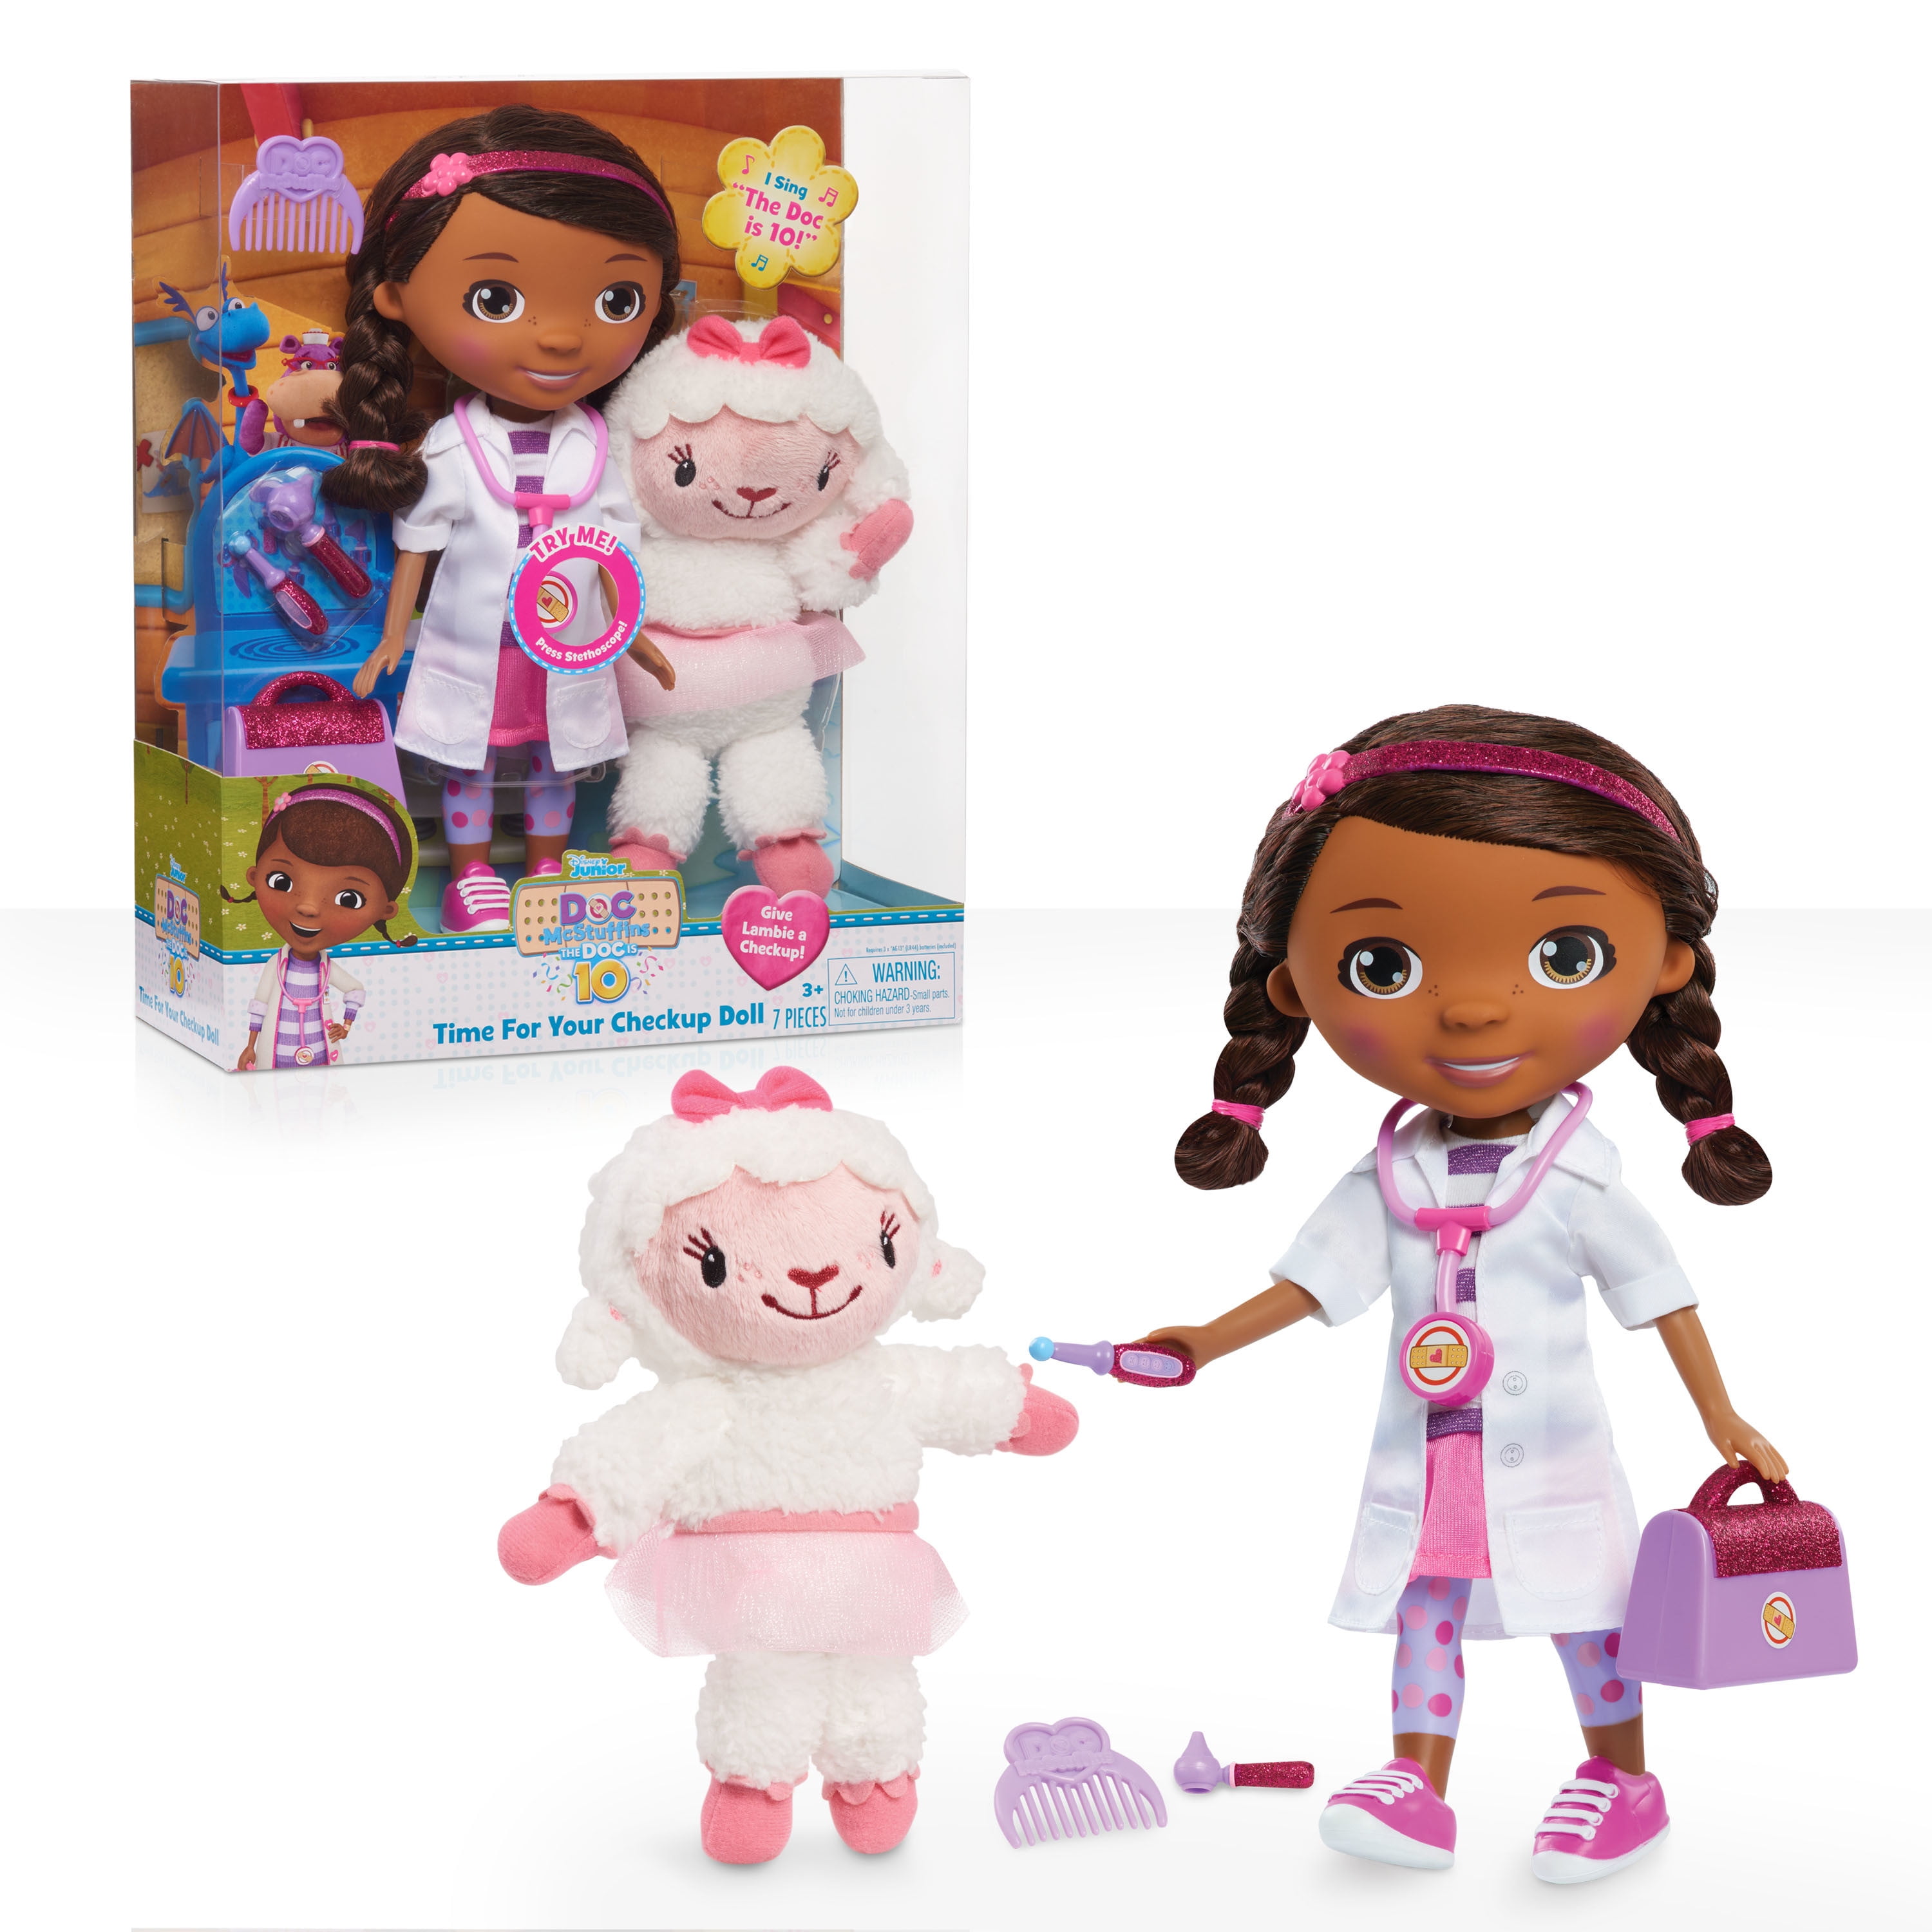 Disney Junior Doc McStuffins 10th Anniversary Time For Your Checkup Doll and Accessories, Officially Licensed Kids Toys for Ages 3 Up, Gifts and Presents